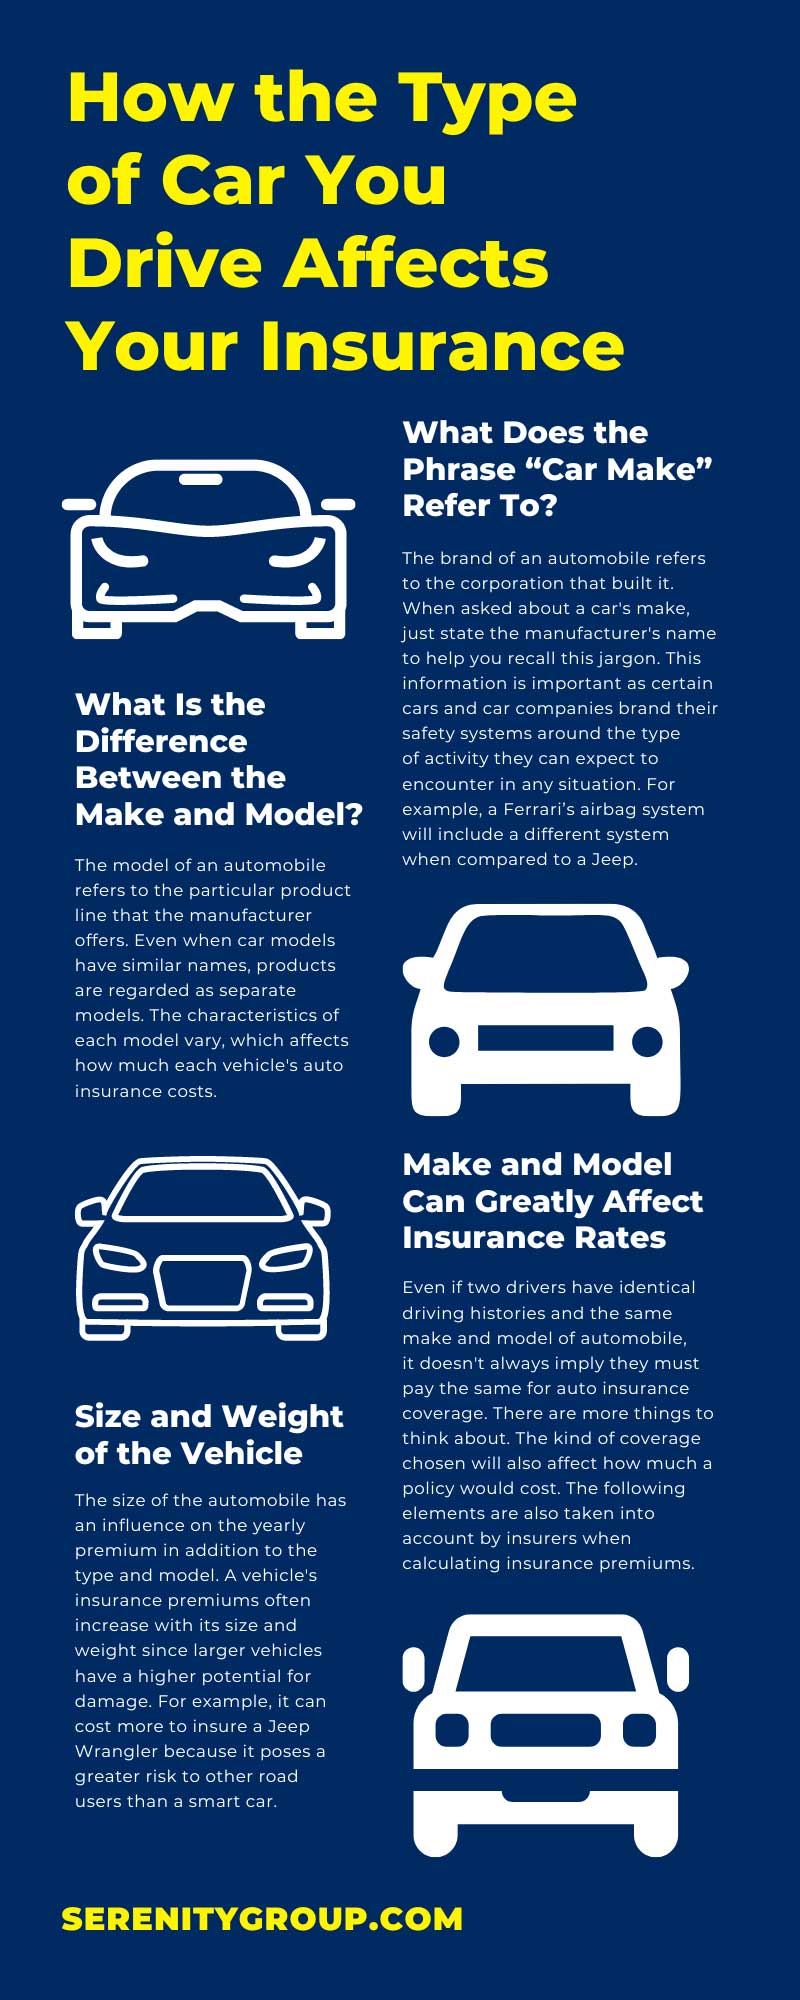 How the Type of Car You Drive Affects Your Insurance